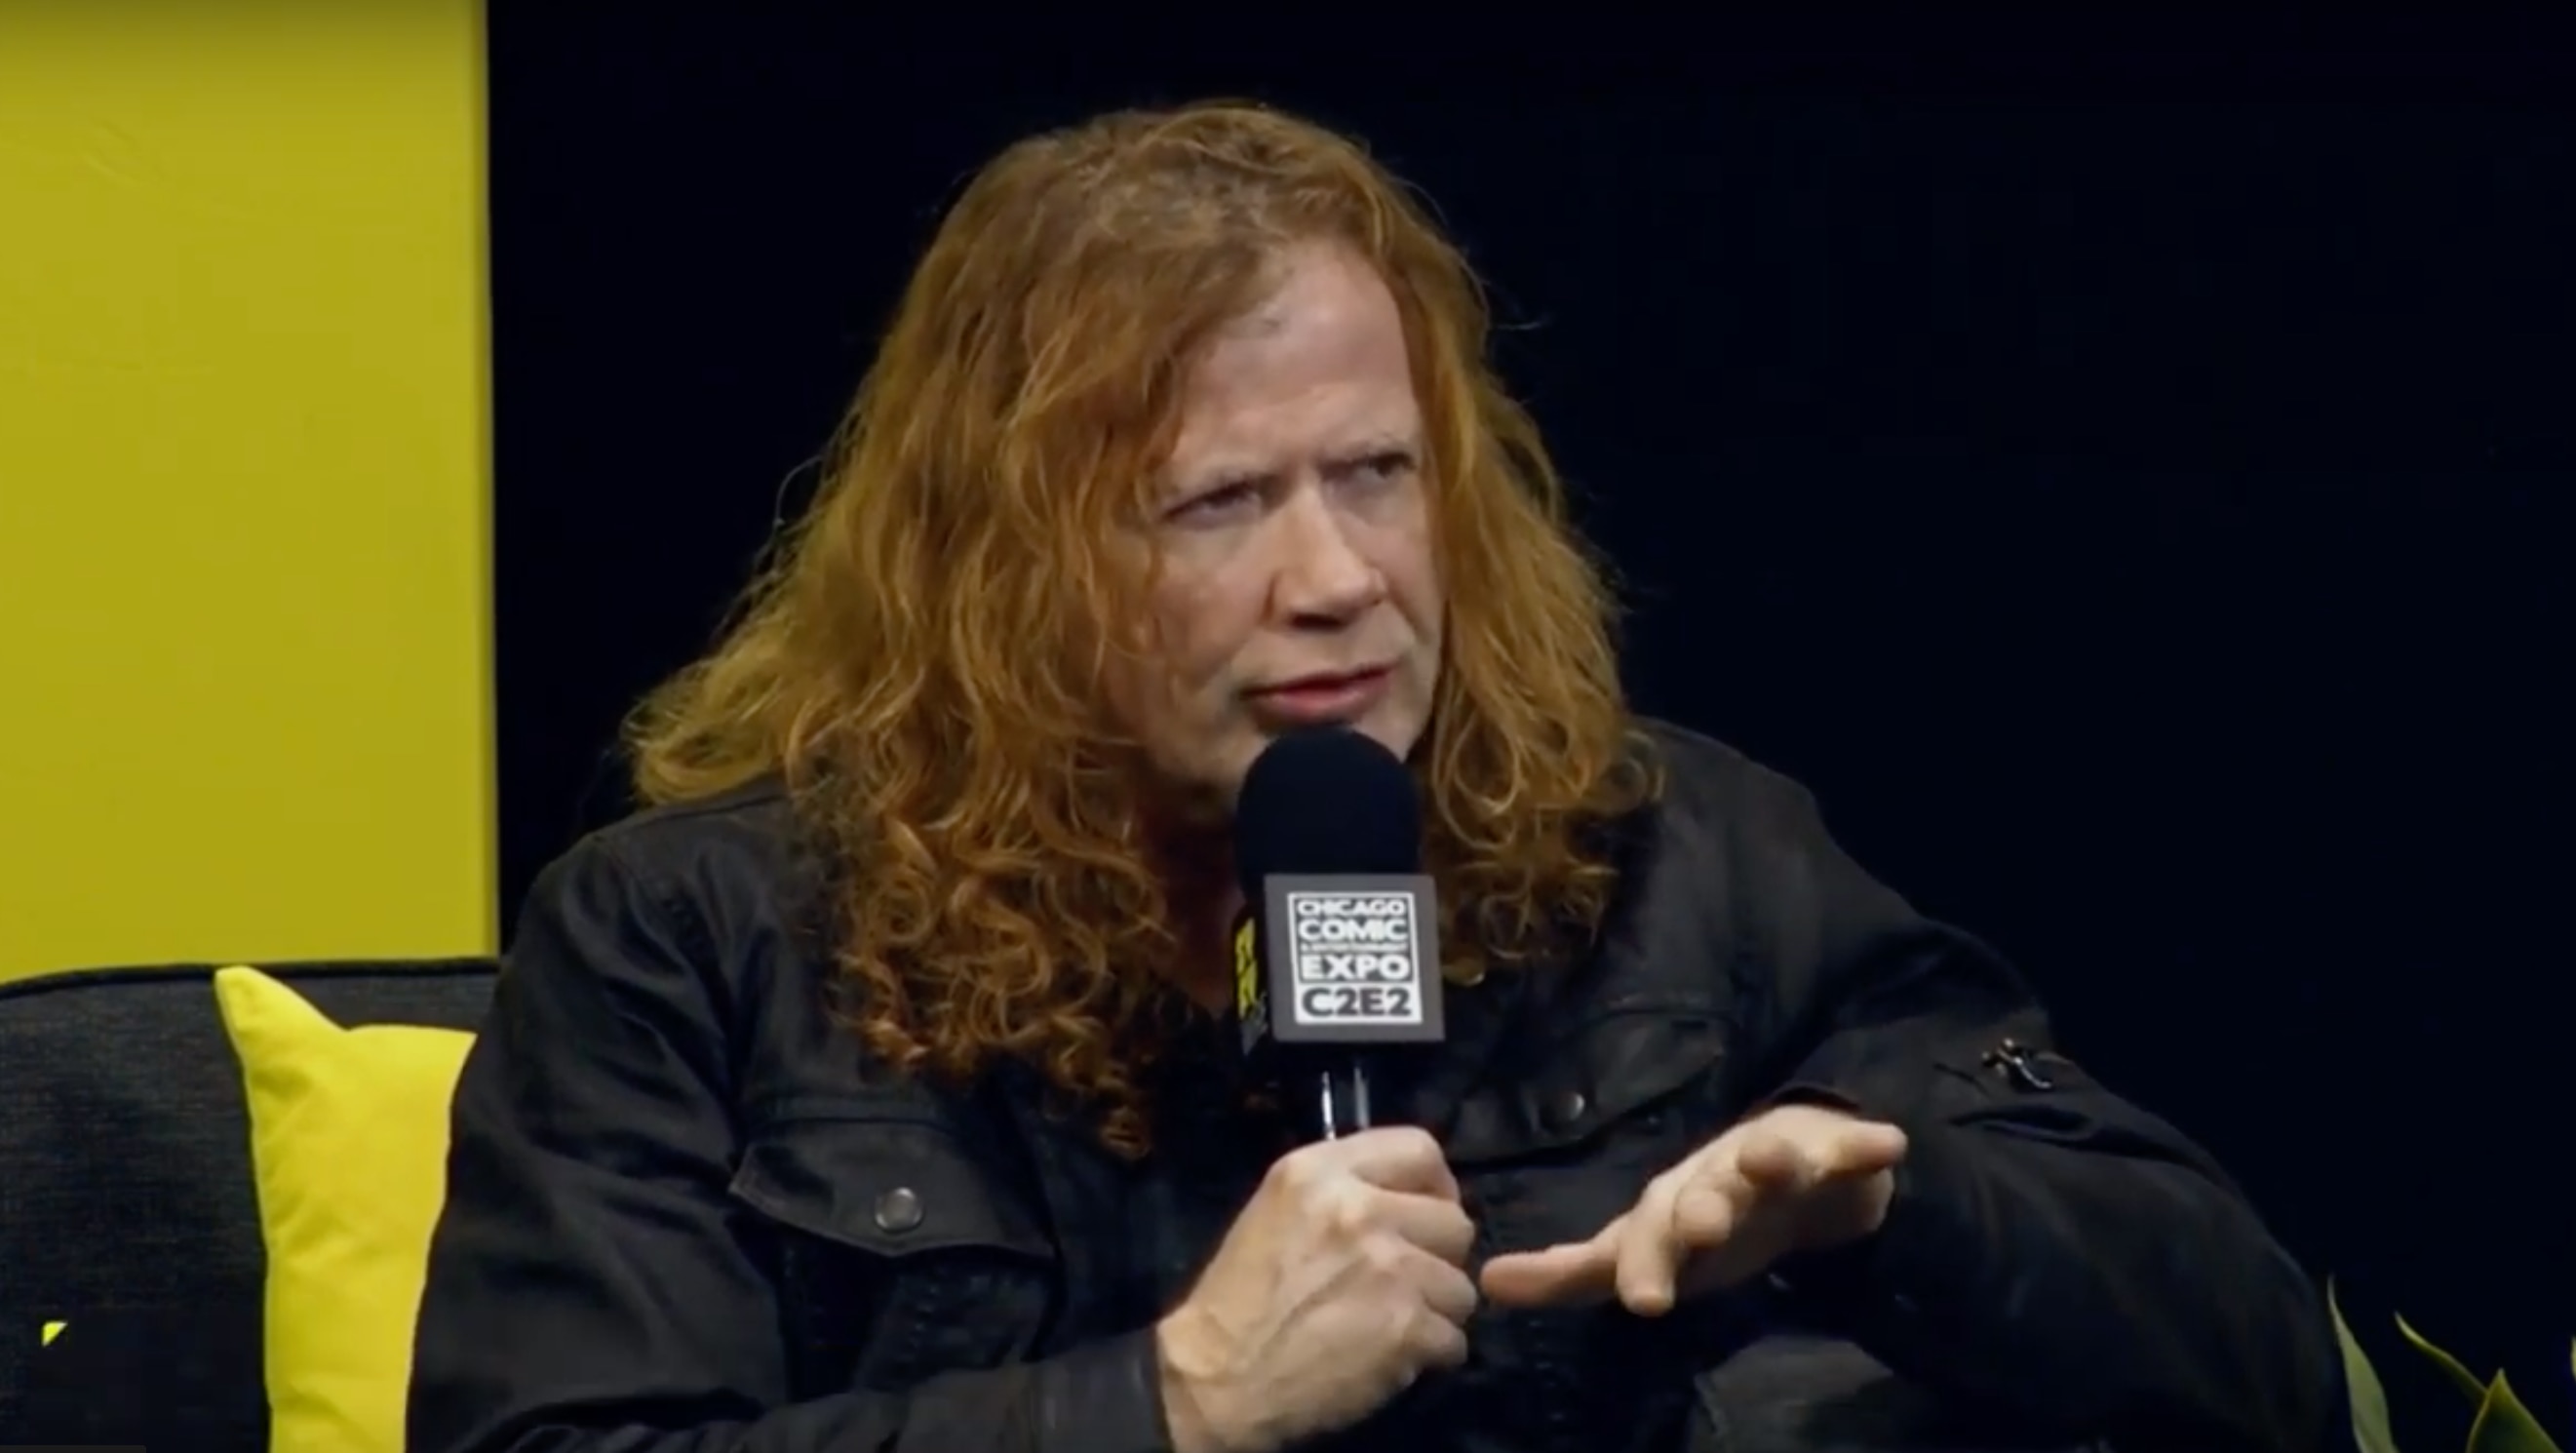 Megadeth's Dave Mustaine at C2E2